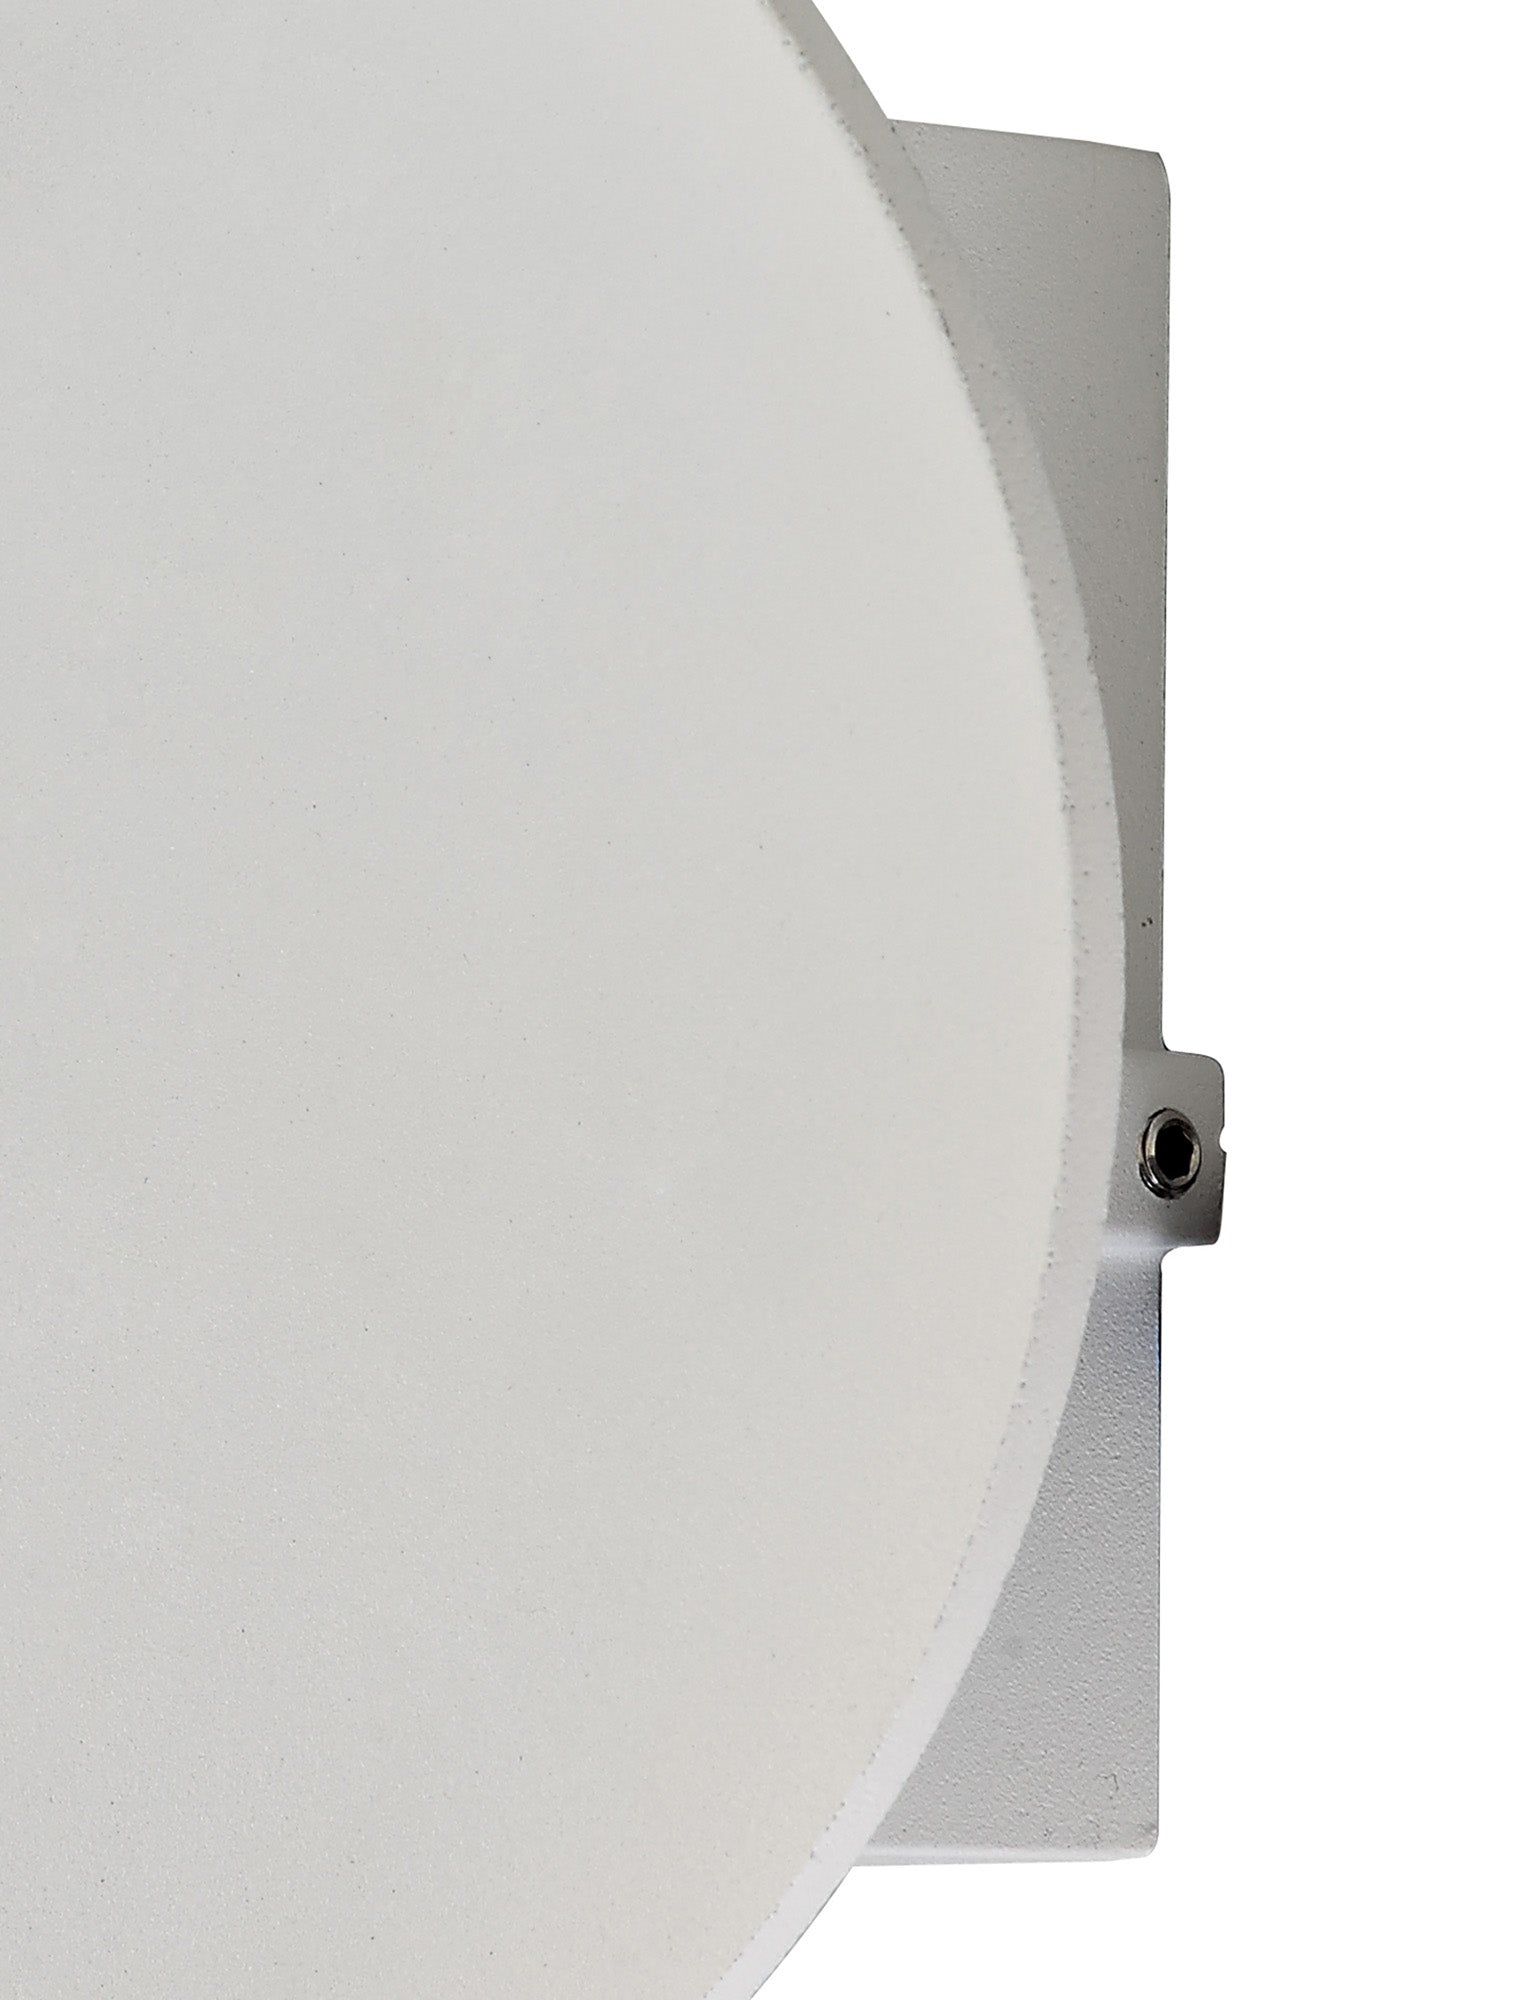 Soitert Wall Lamp, 1 x 6W LED, 3000K, 700lm, IP54, Anthracite, 3yrs Warranty